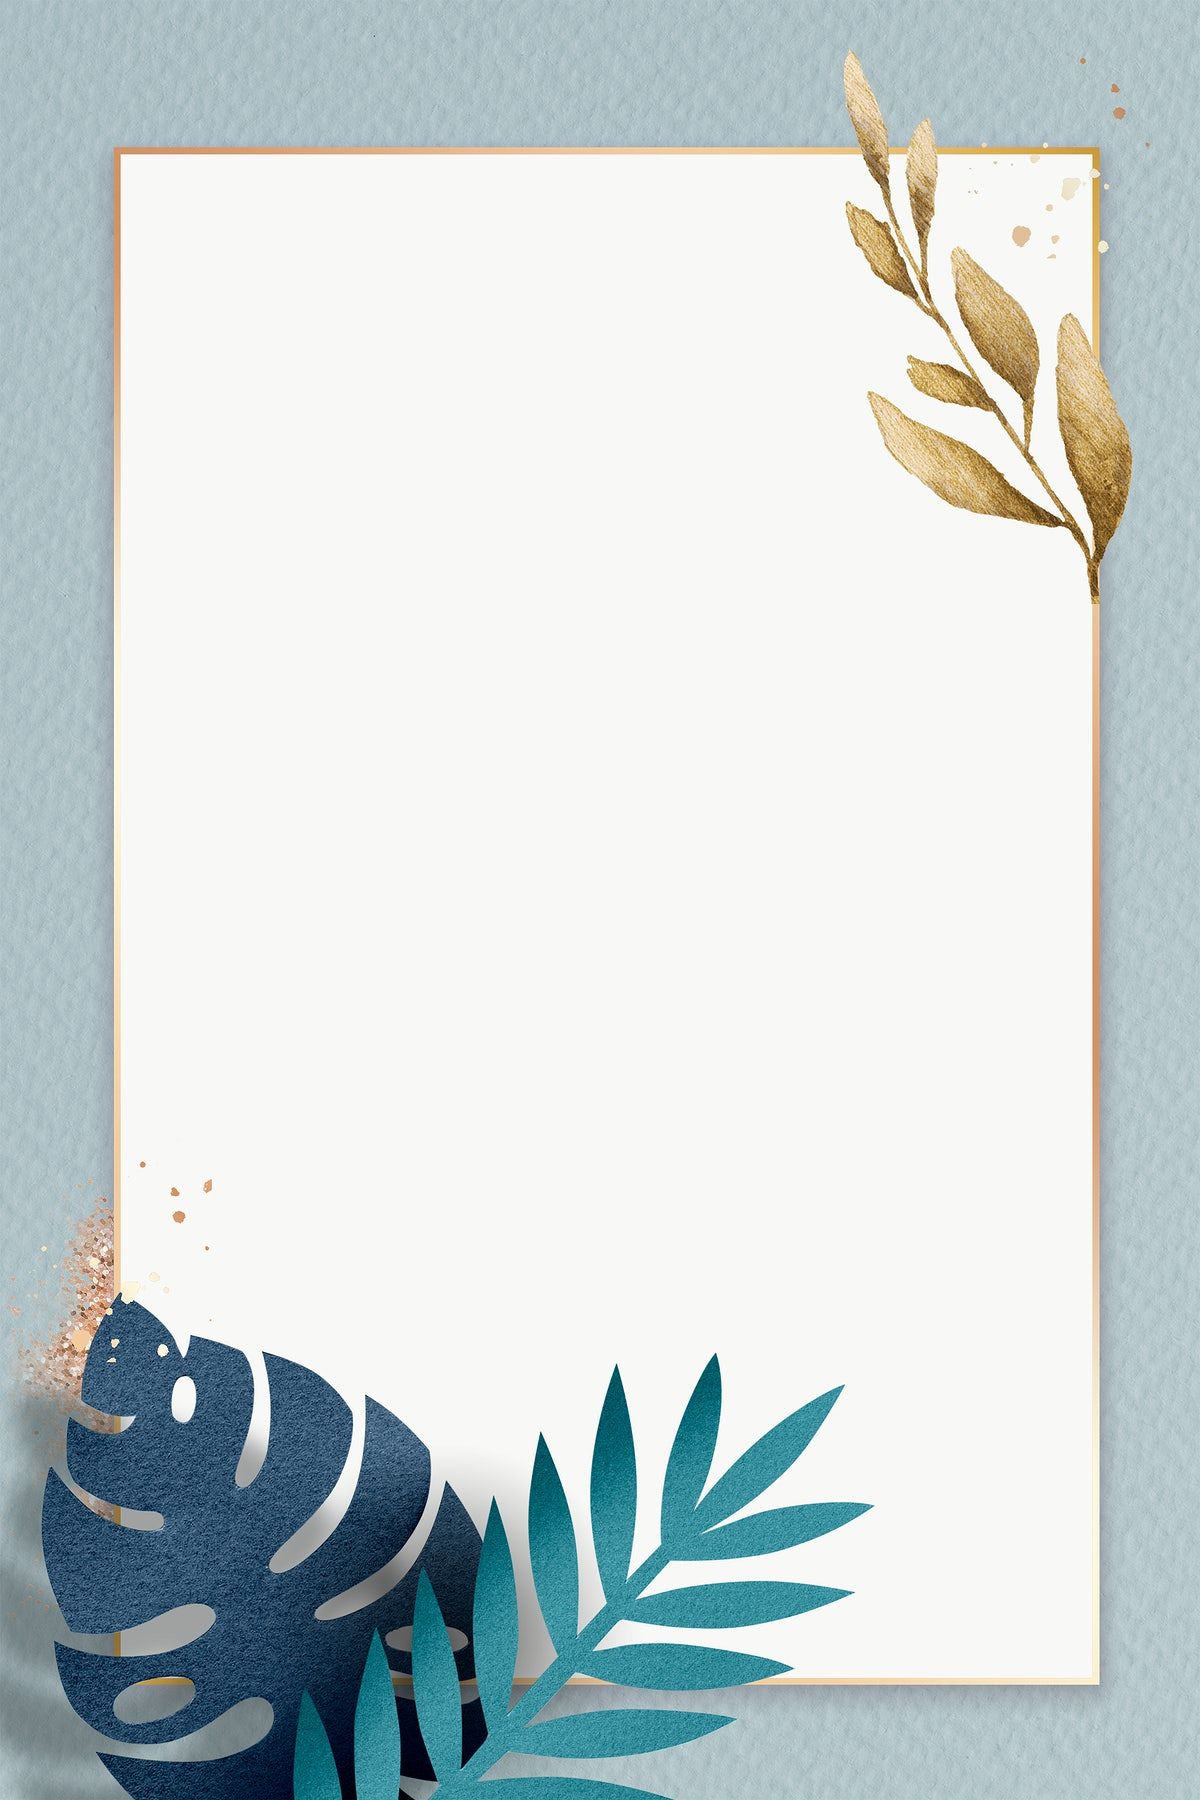 Download free png of Blue monstera leaf on a gray frame design element by Gade about leafy gol...jpg